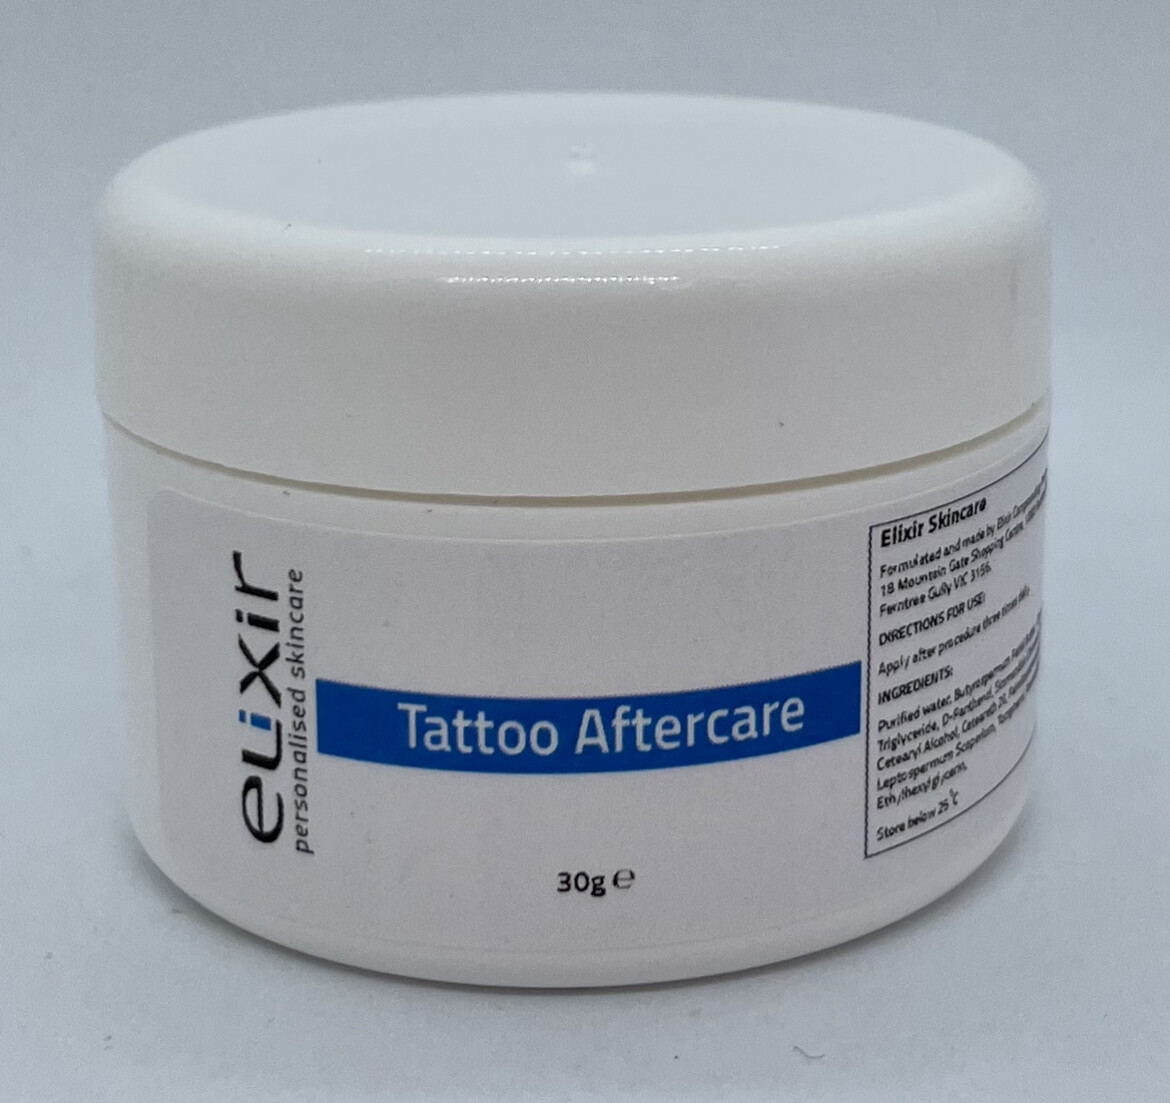 Tattoo Care First 48 Hours: How to Clean & Protect Your New Ink